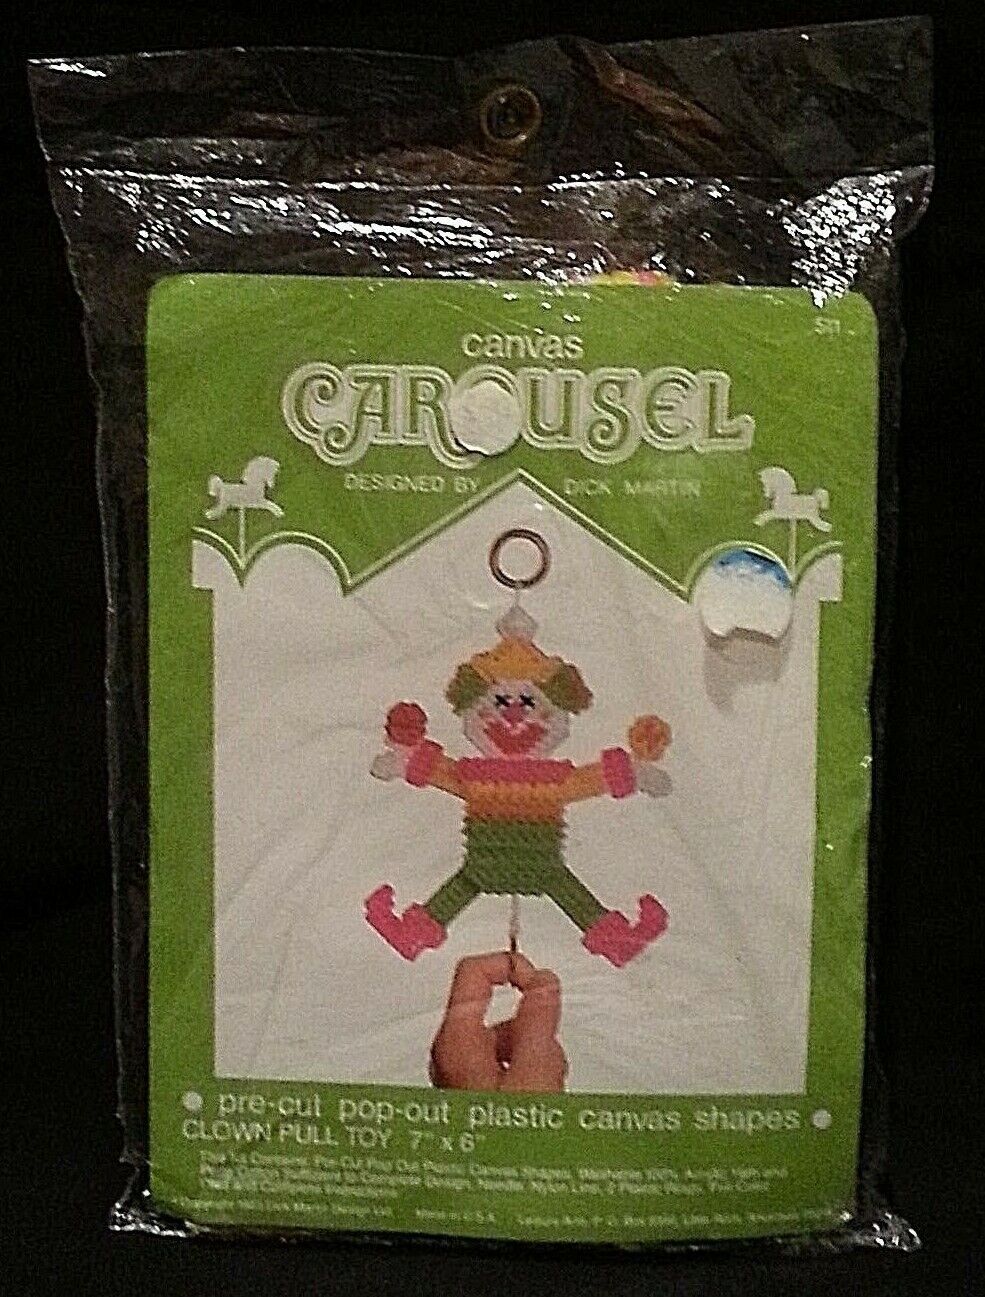 Vintage Canvas Carousel CLOWN PULL TOY Plastic Canvas Kit #511 Dick Martin NEW